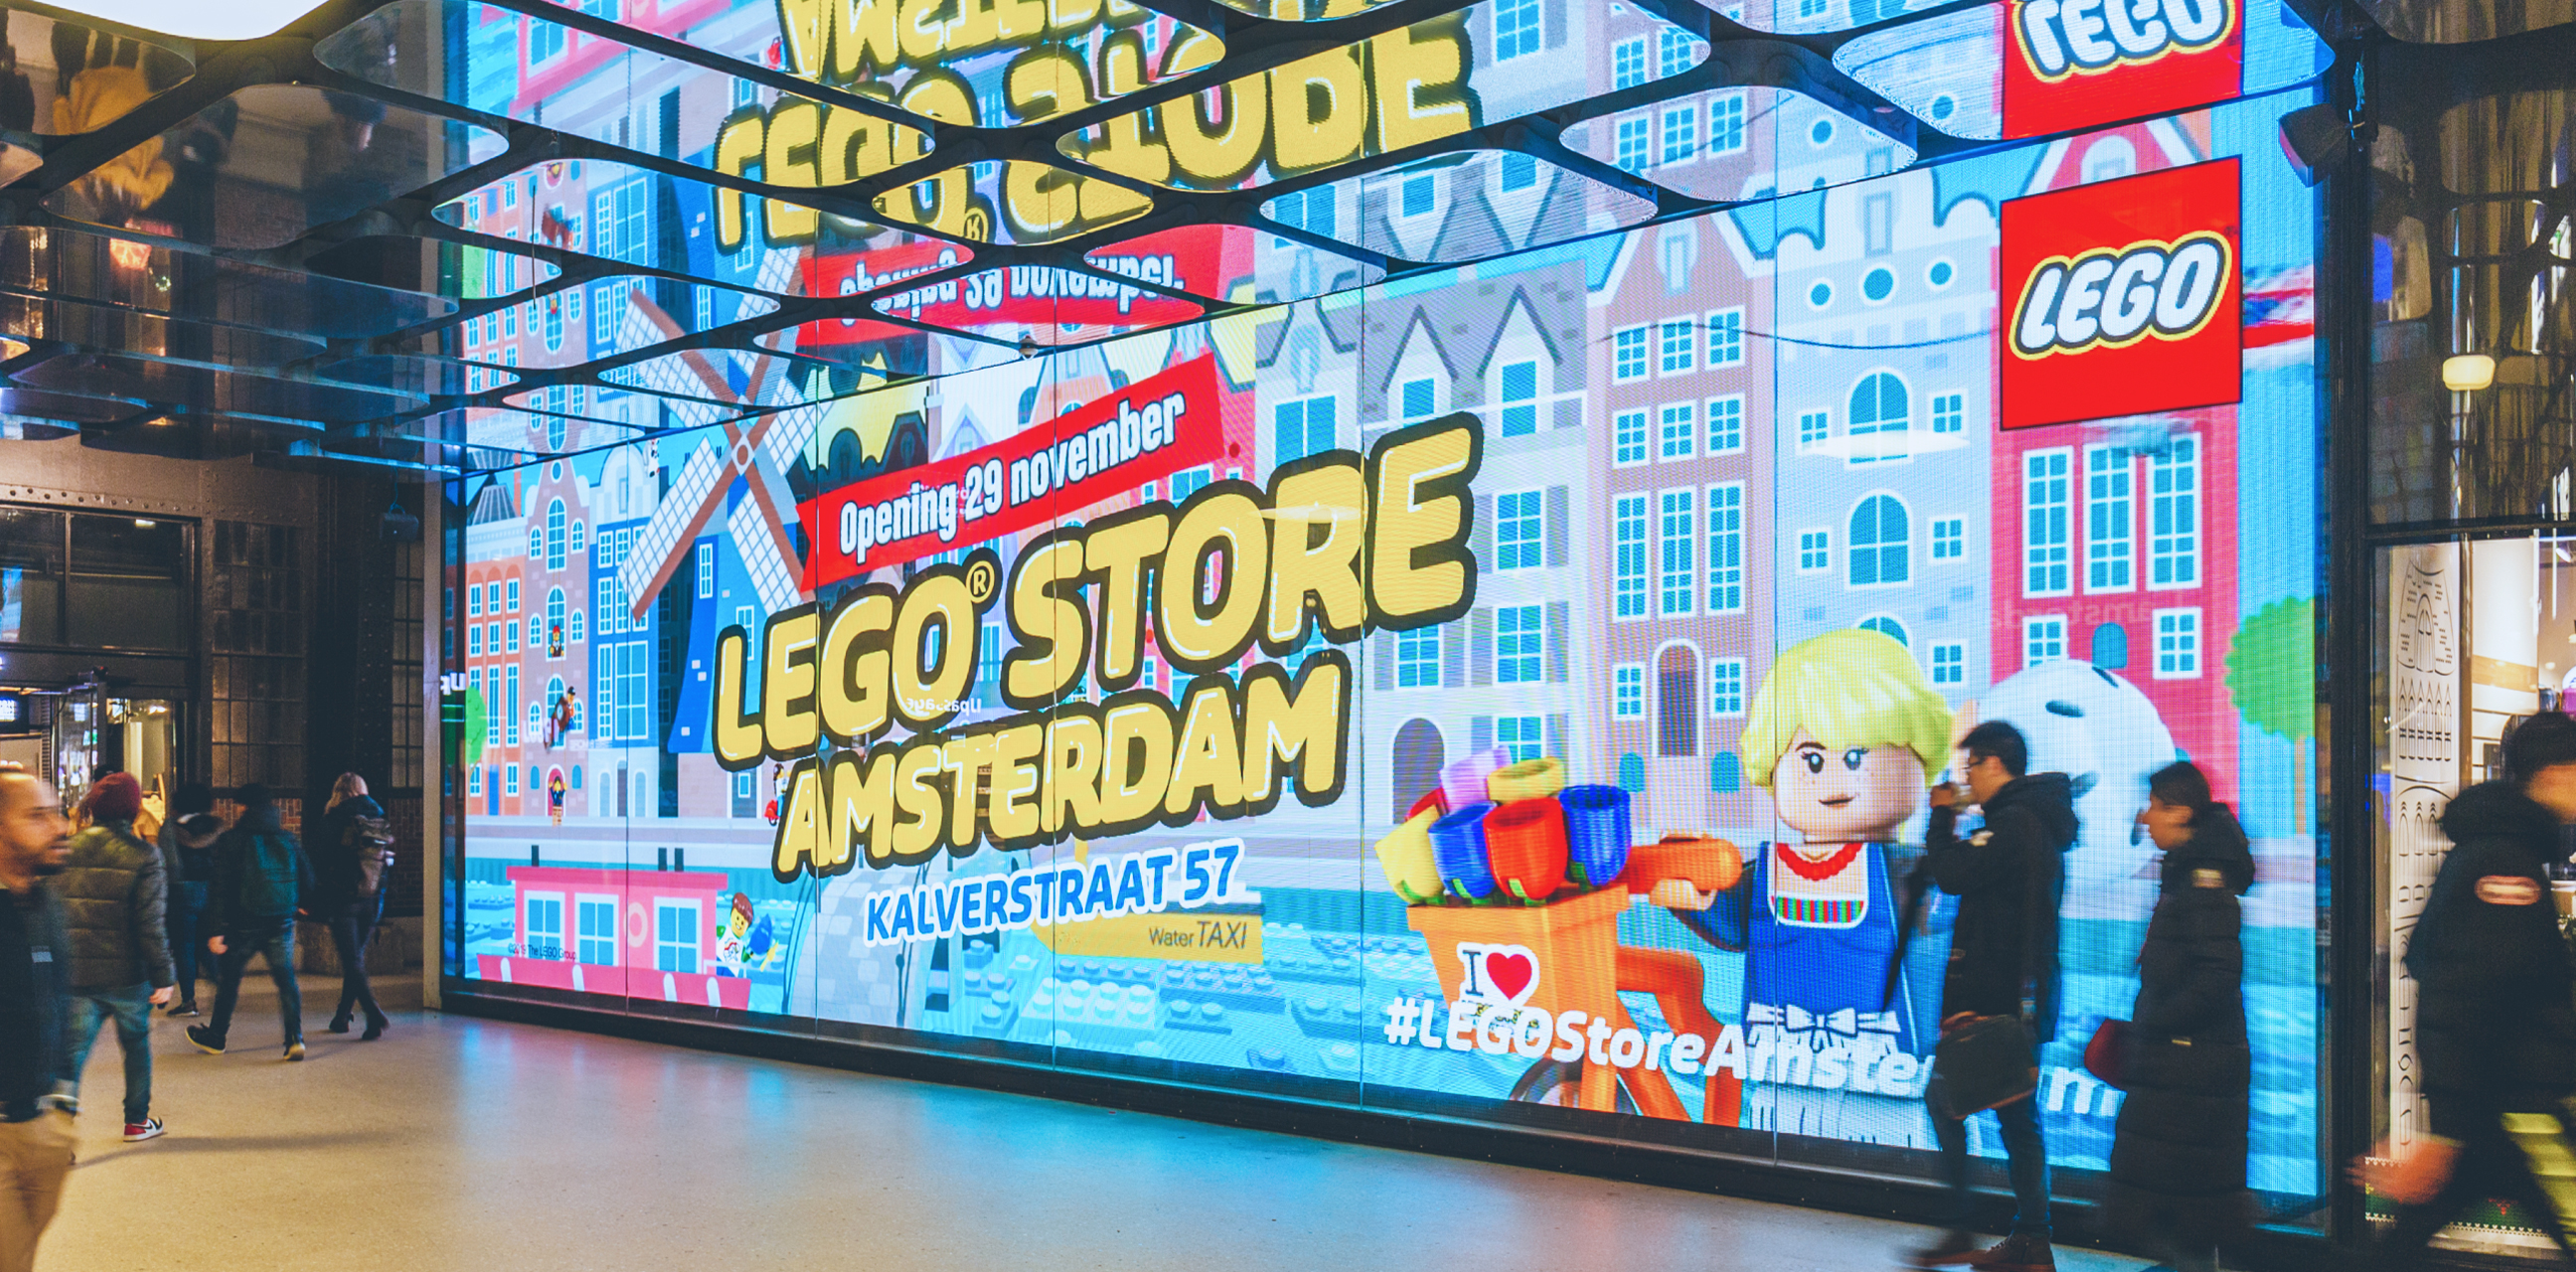 Flagship Store Opening Amsterdam